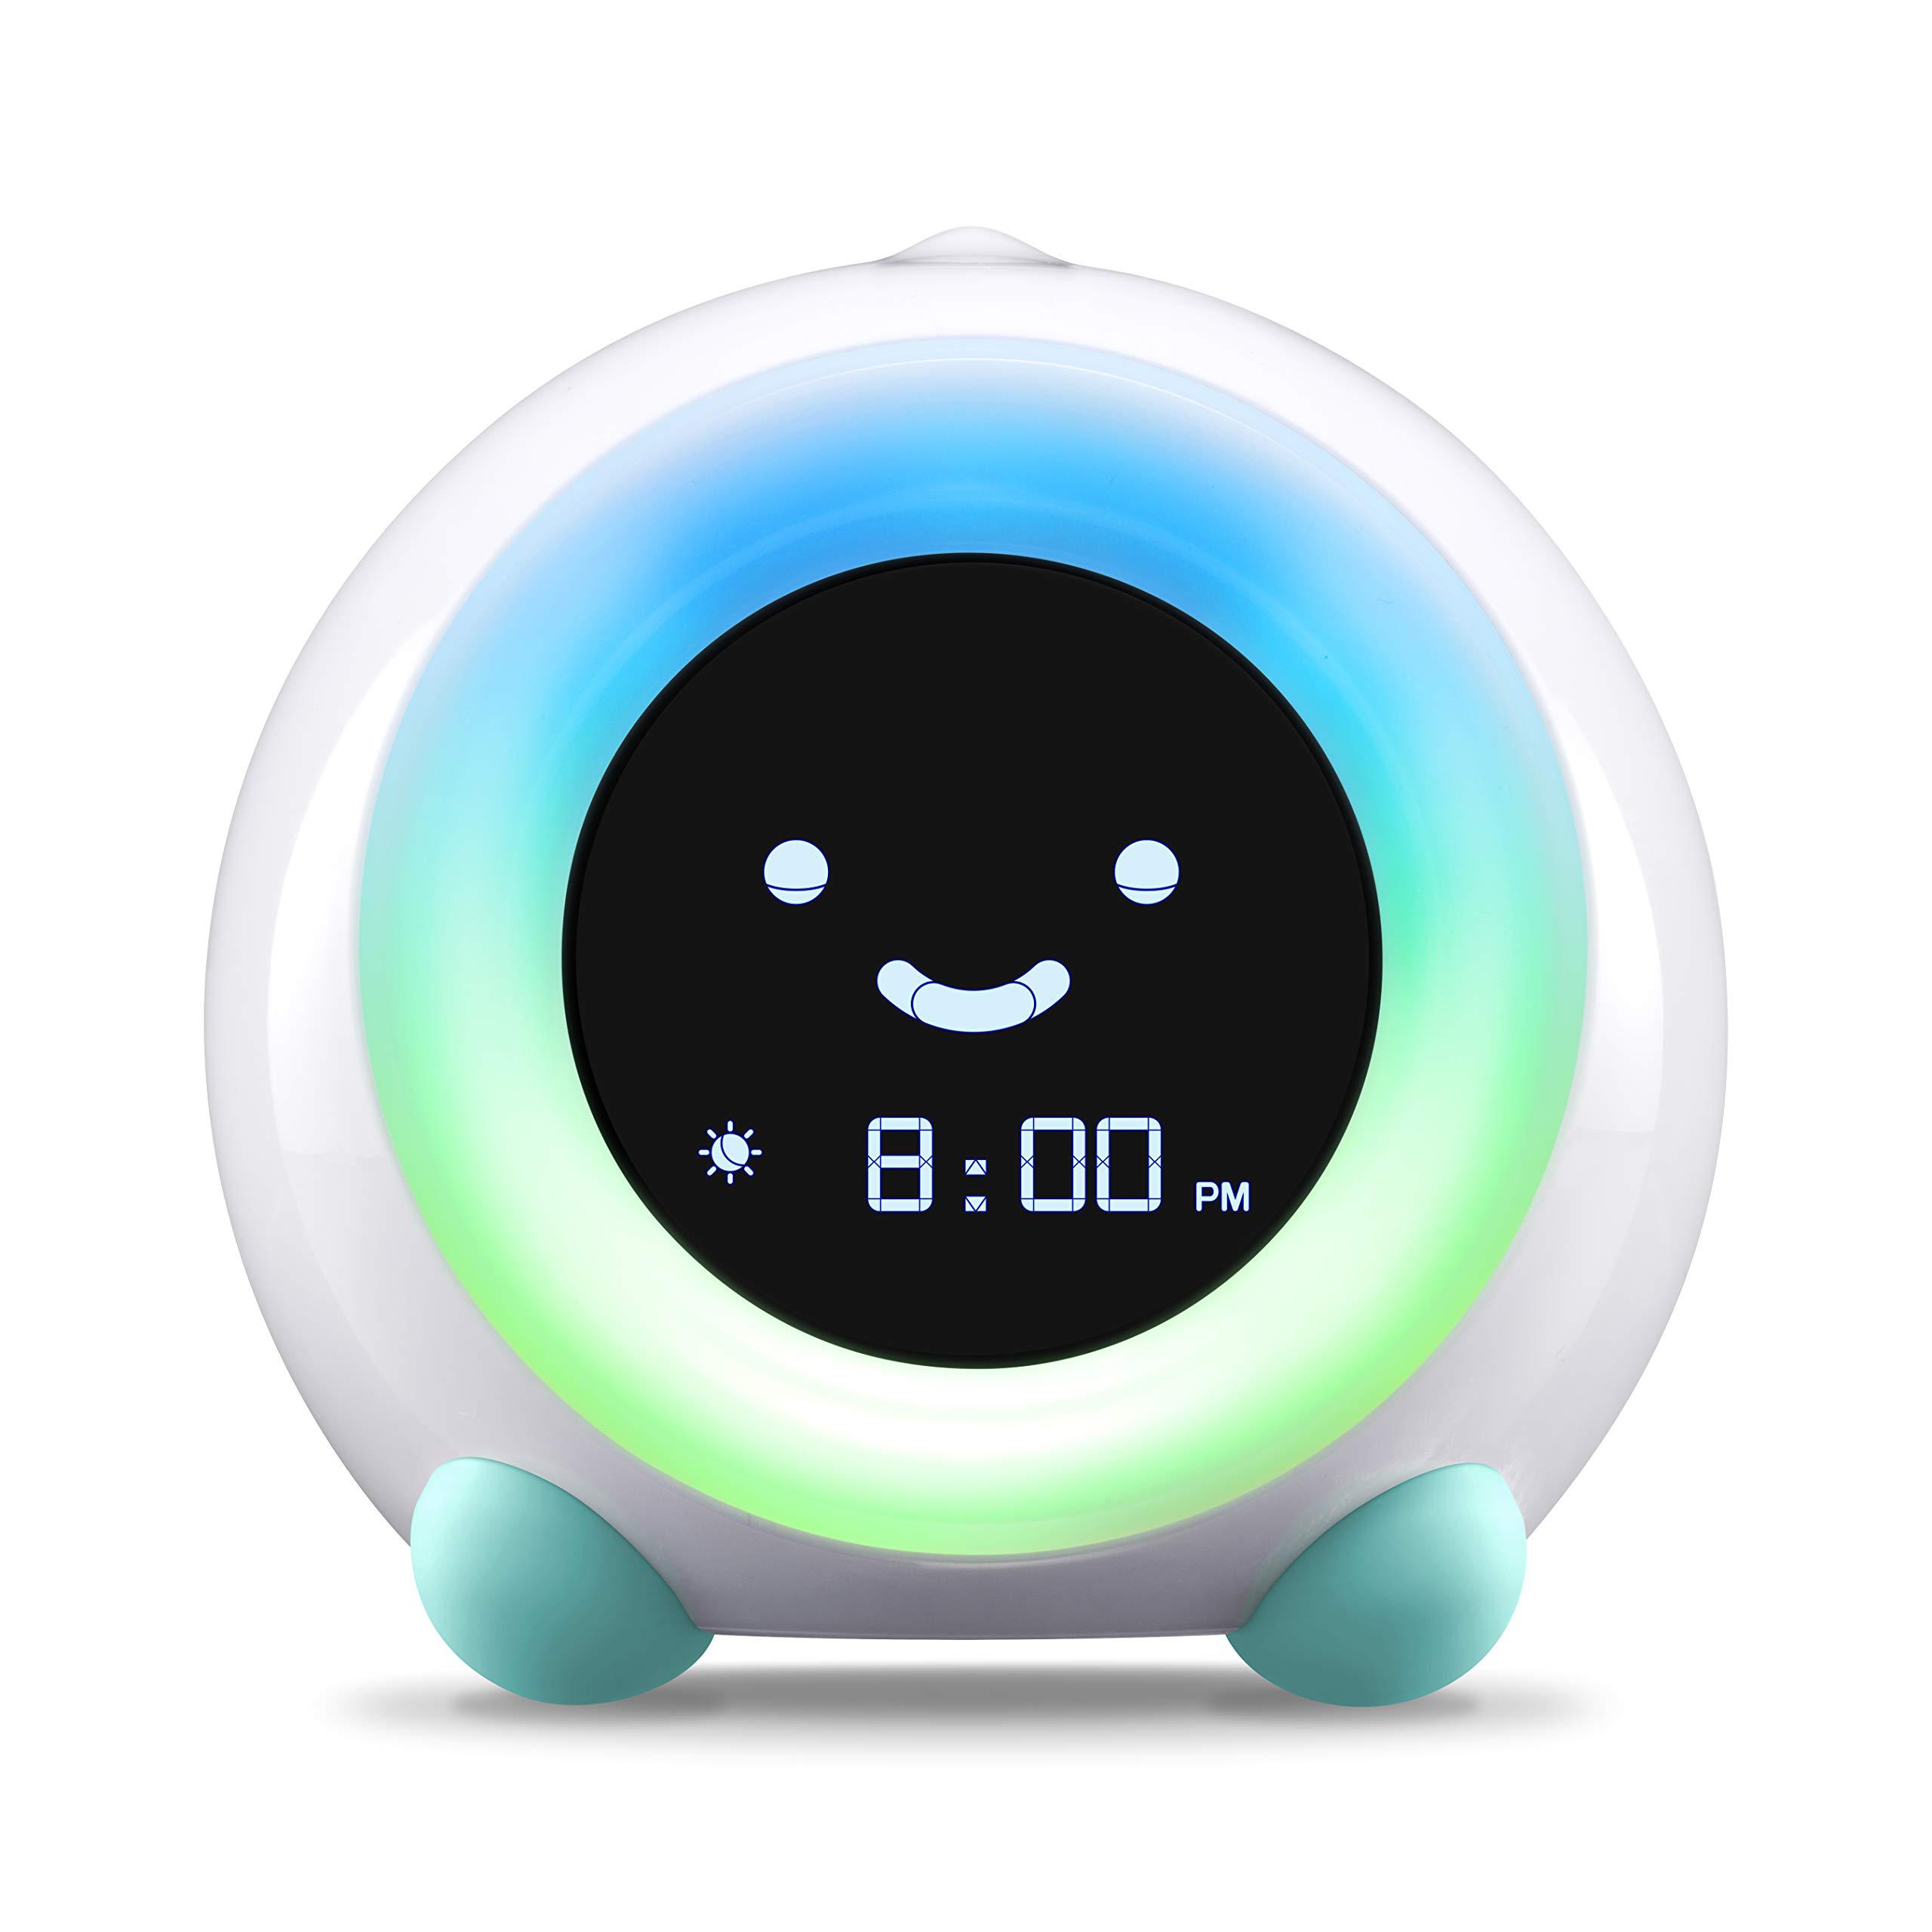 littlehippo mella: ready to rise children's sleep trainer, night light, sound machine and ok to wake alarm clock for toddlers